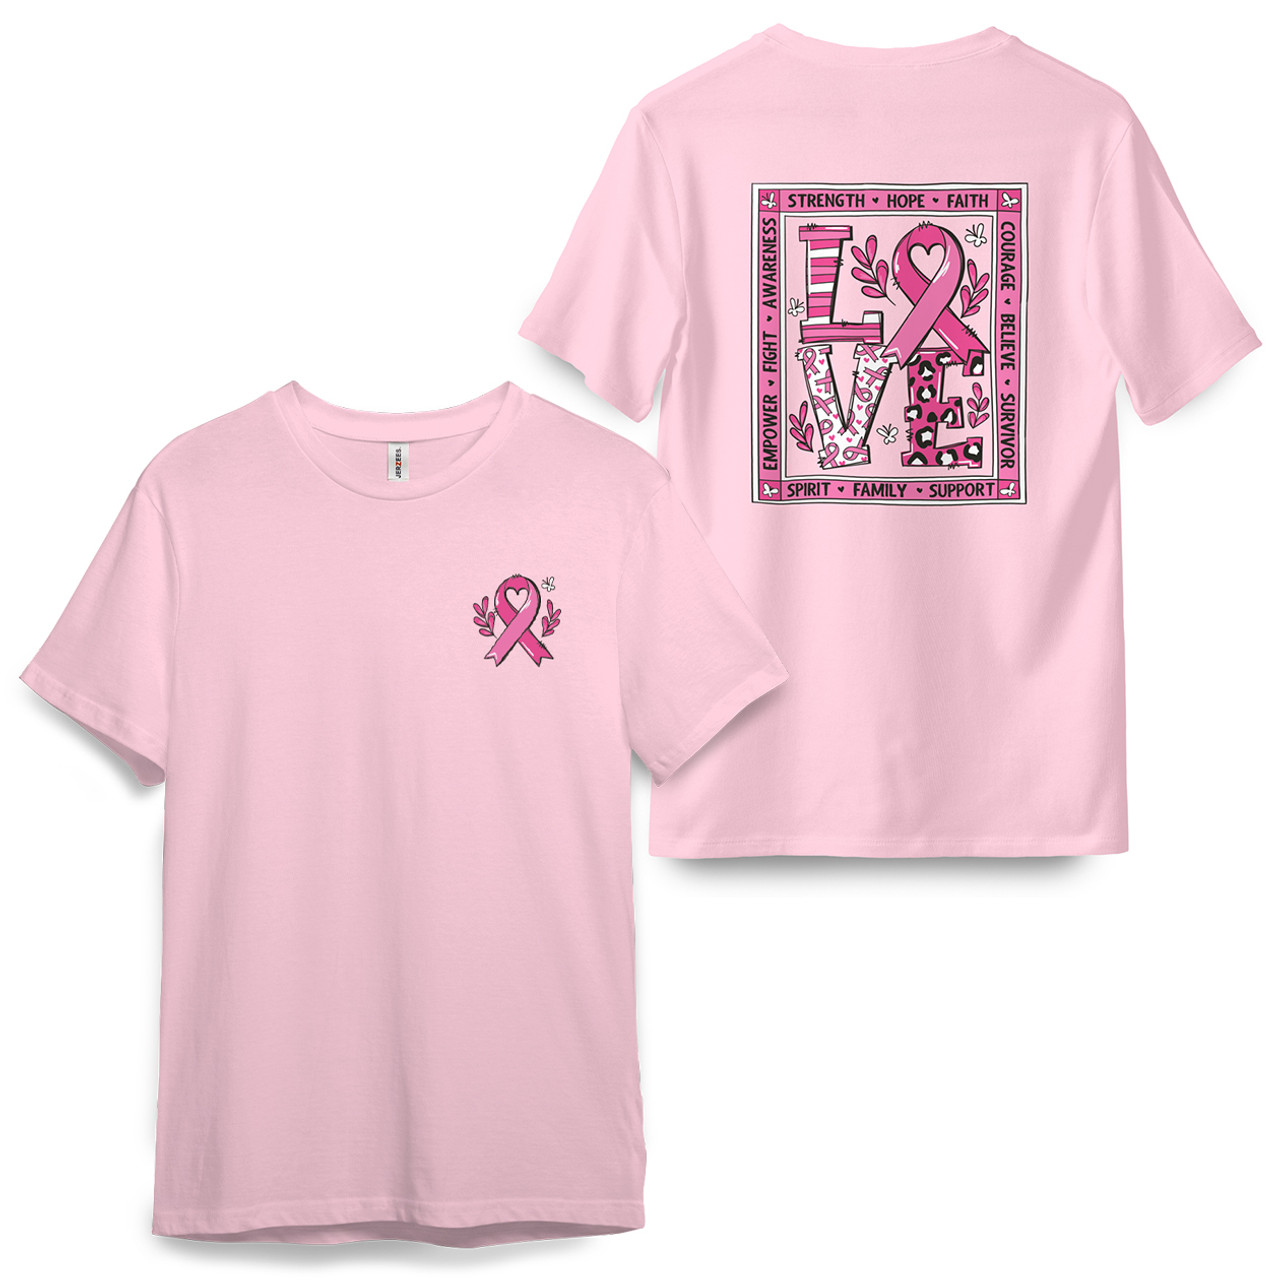 Breast Cancer Awareness - Hope - Short Sleeve Jersey - Pink C 3X